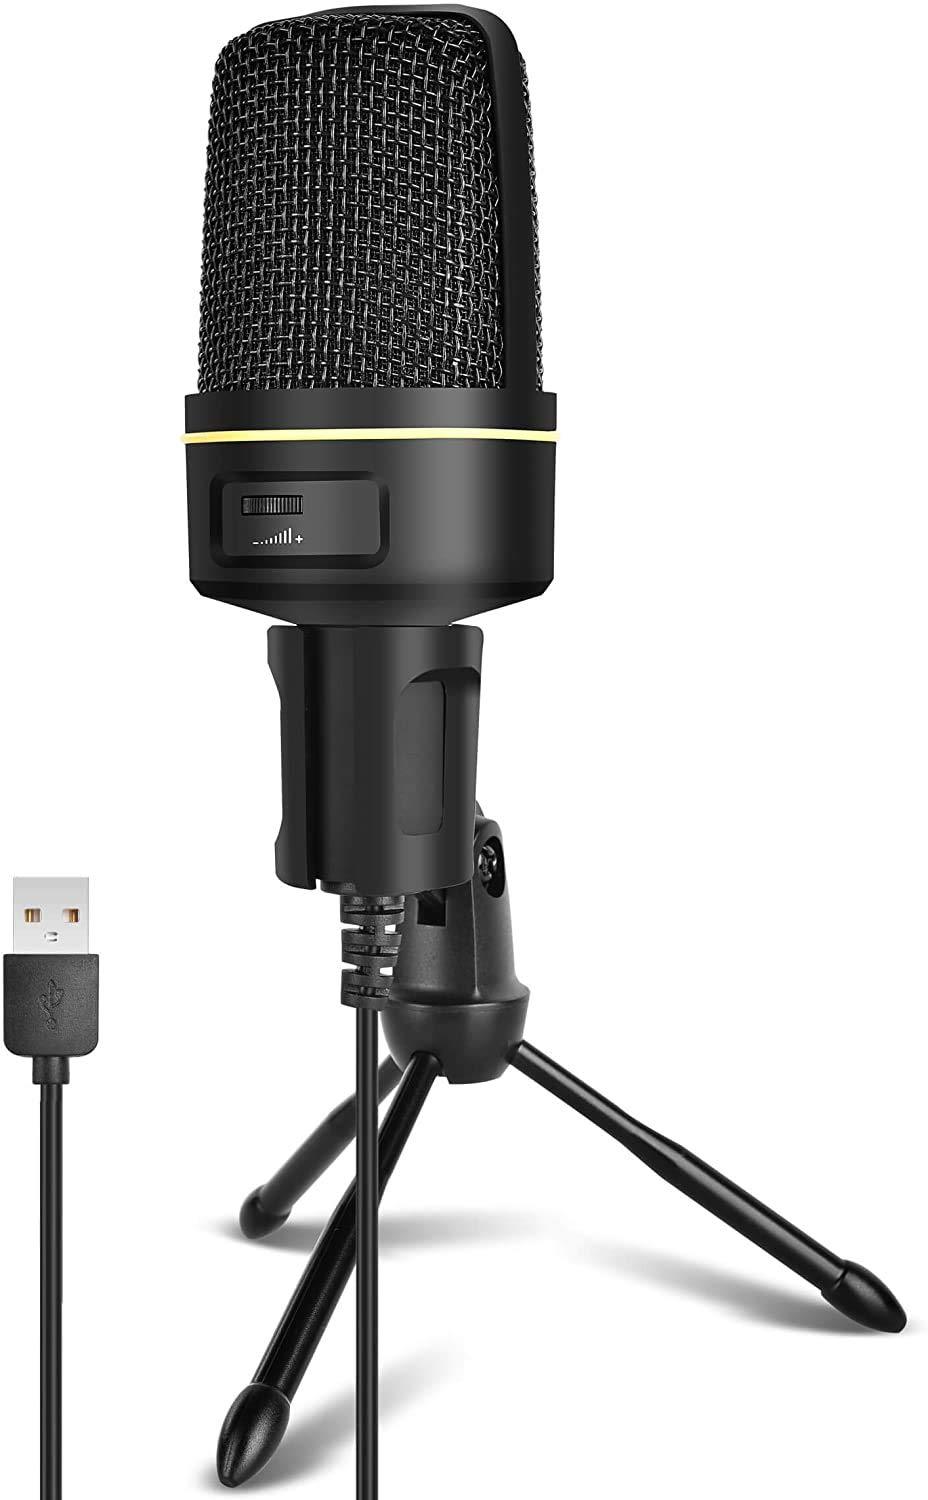 REMALL USB Microphone for Computer, Condenser Mic for PC Podcast,Studio Recording, Live Streaming, Karaoke Singing, with Stand